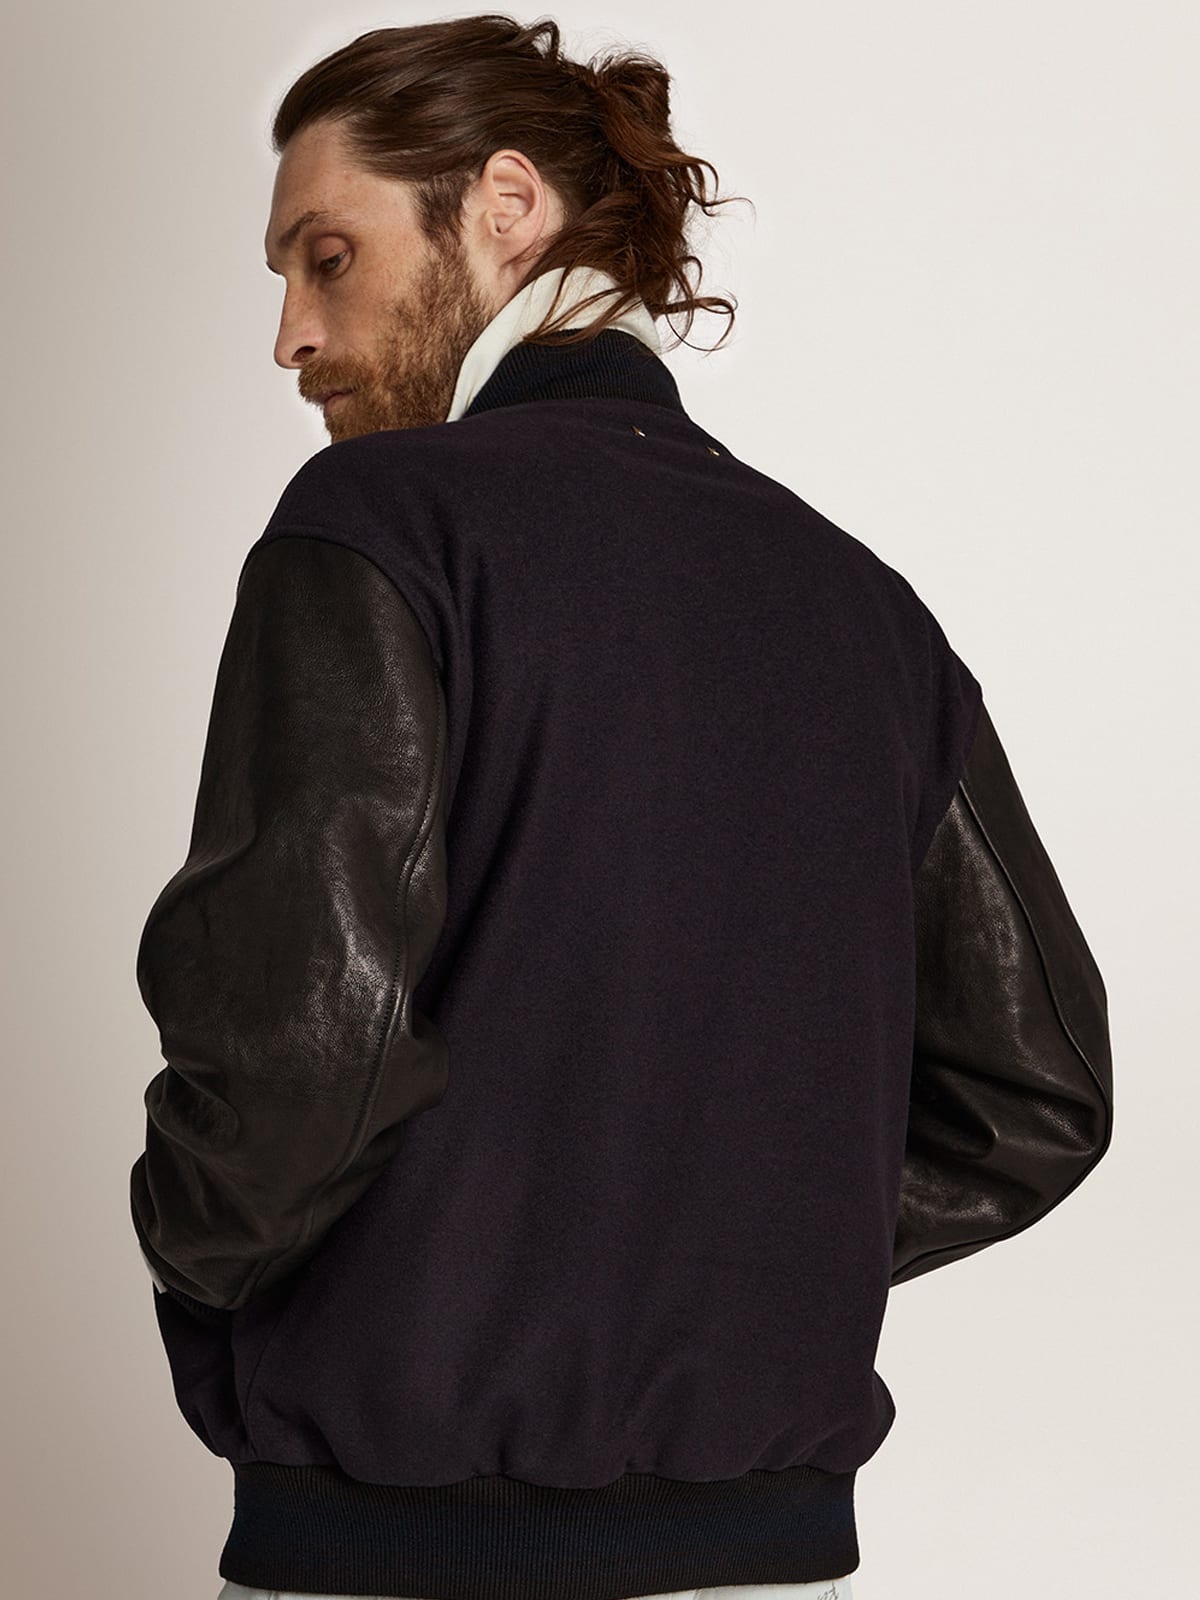 Golden Goose - Men's bomber jacket in dark blue wool with leather sleeves in 